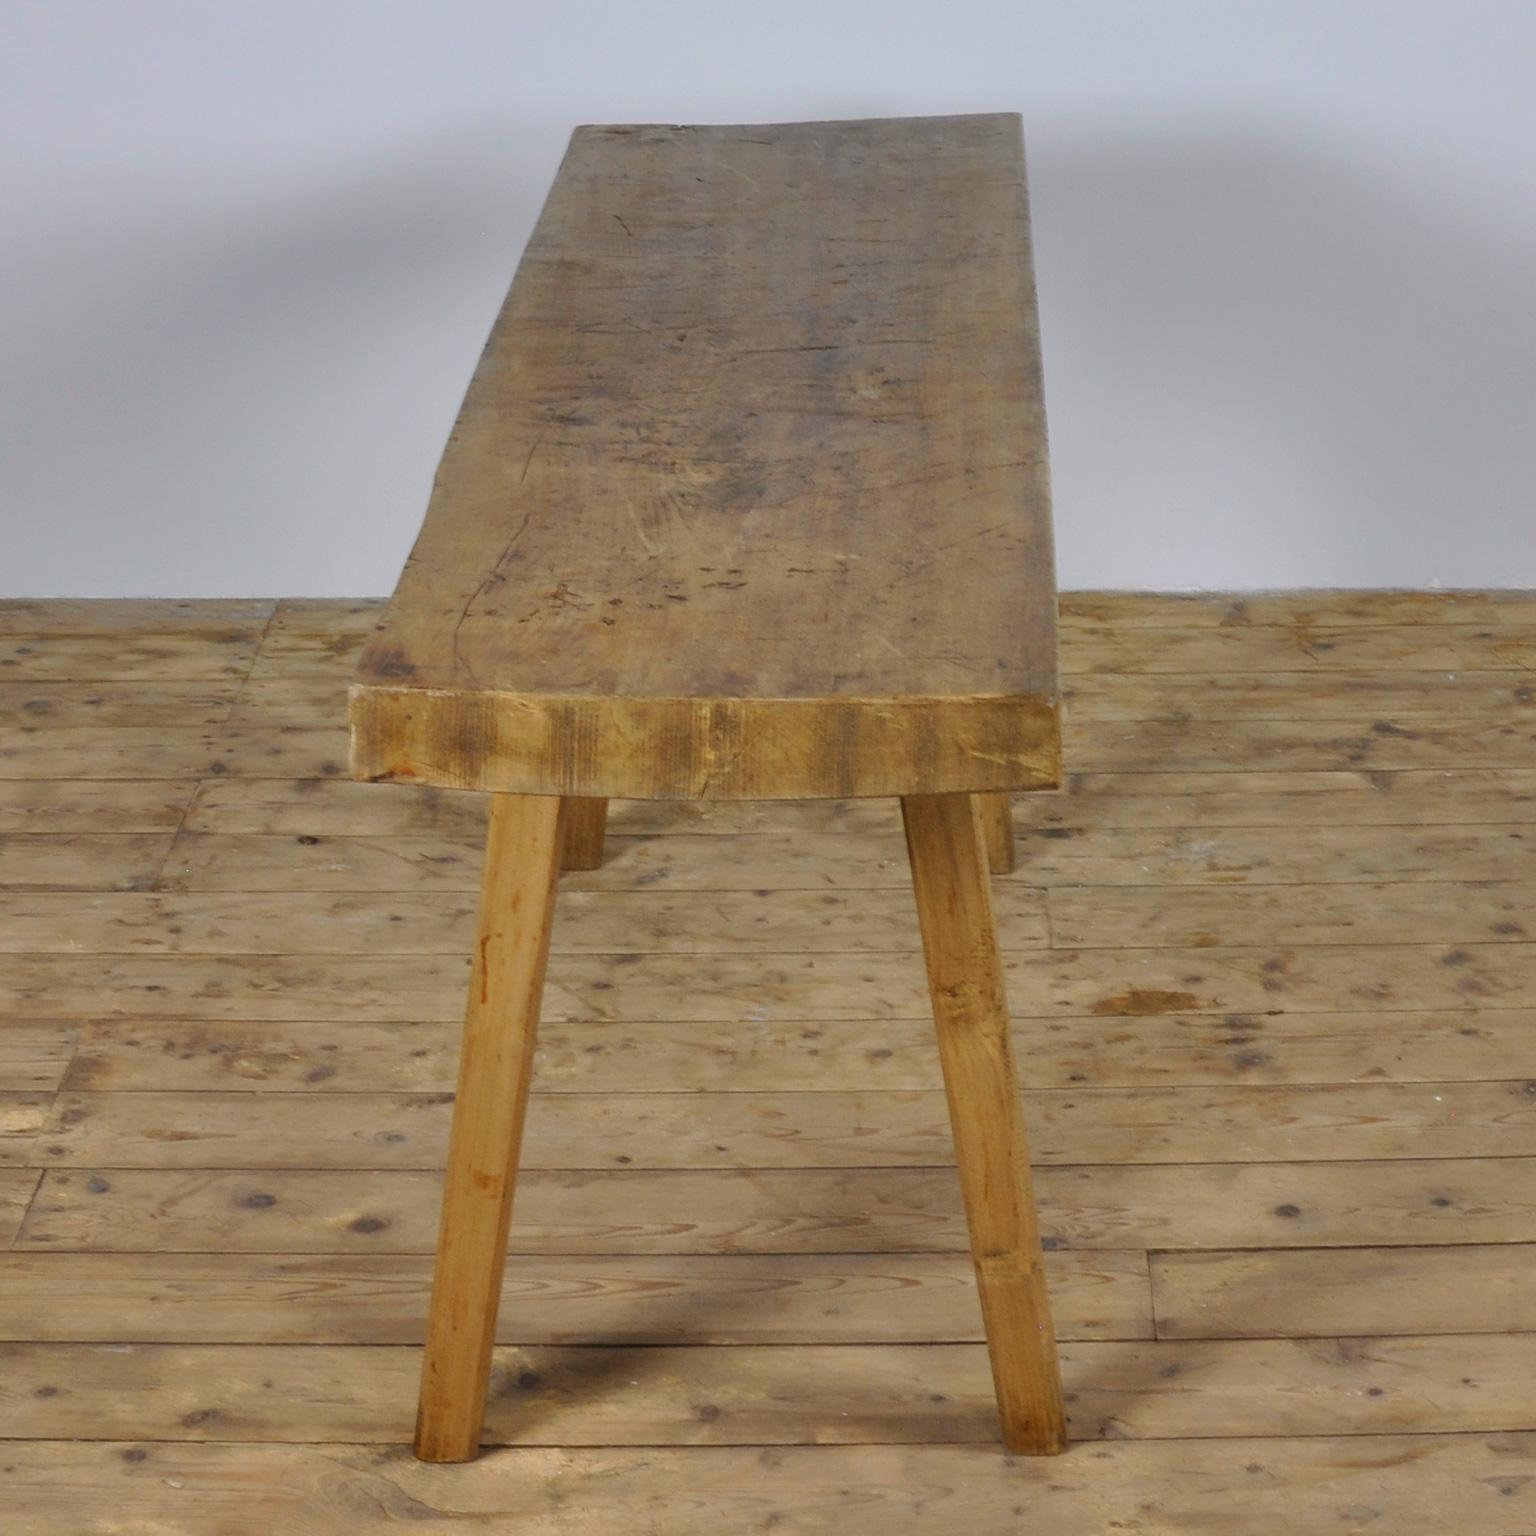 This butcher's table was produced in Hungary circa 1930s and has a 10 cm thick top. The piece features the original legs and has been wax-finished.